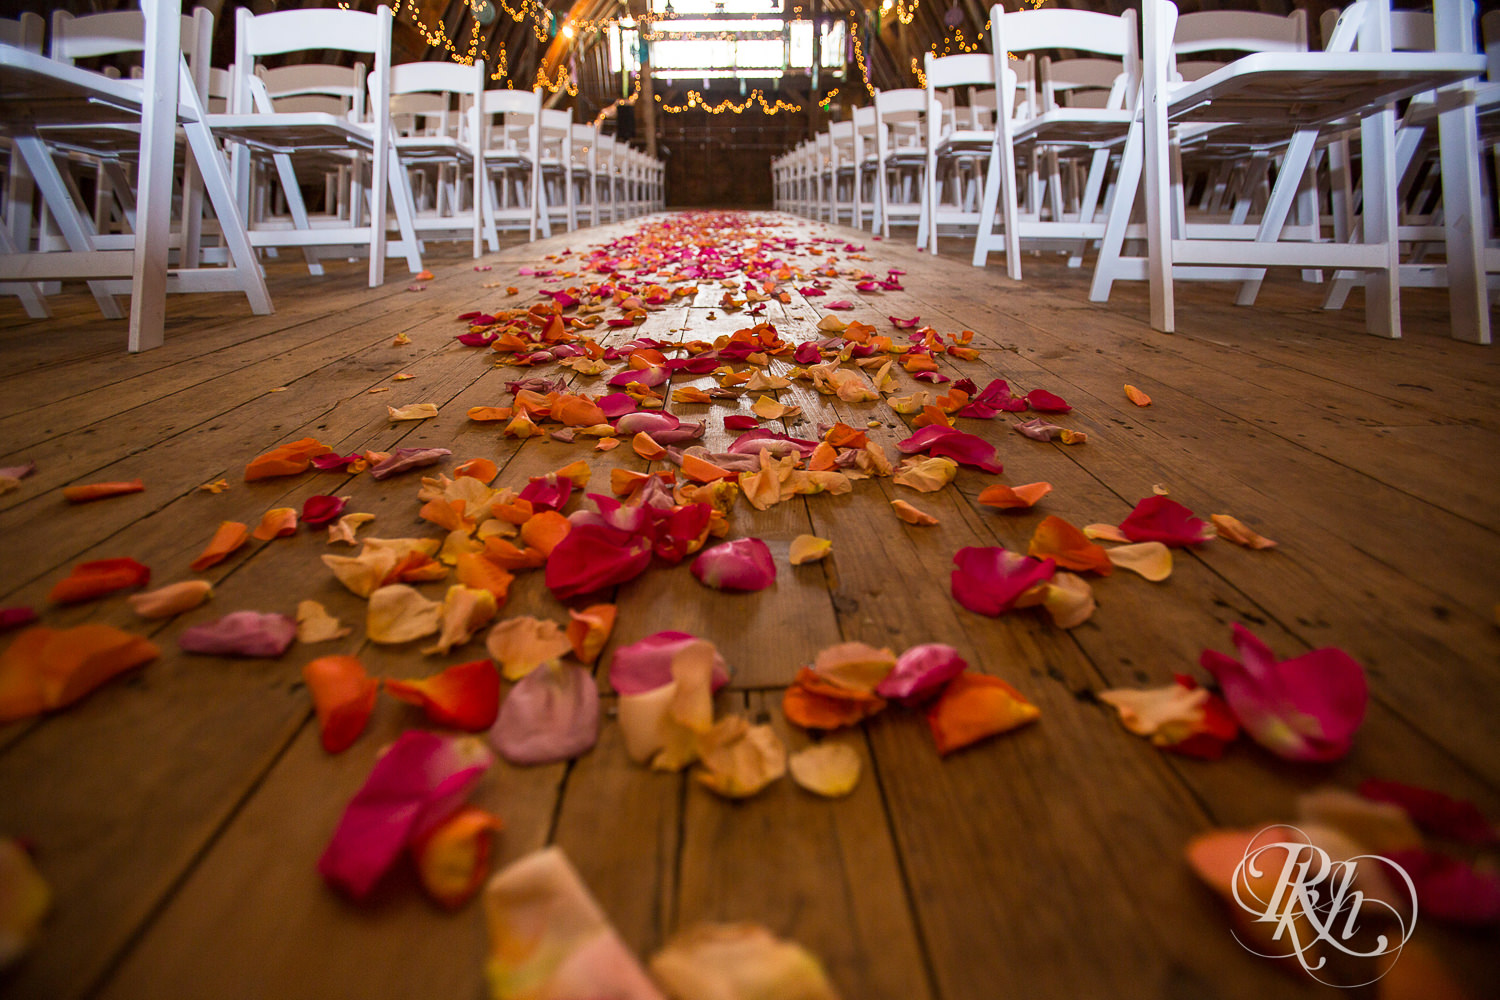 Indoor barn wedding ceremony space at Coops Event Barn in Dodge Center, Minnesota.